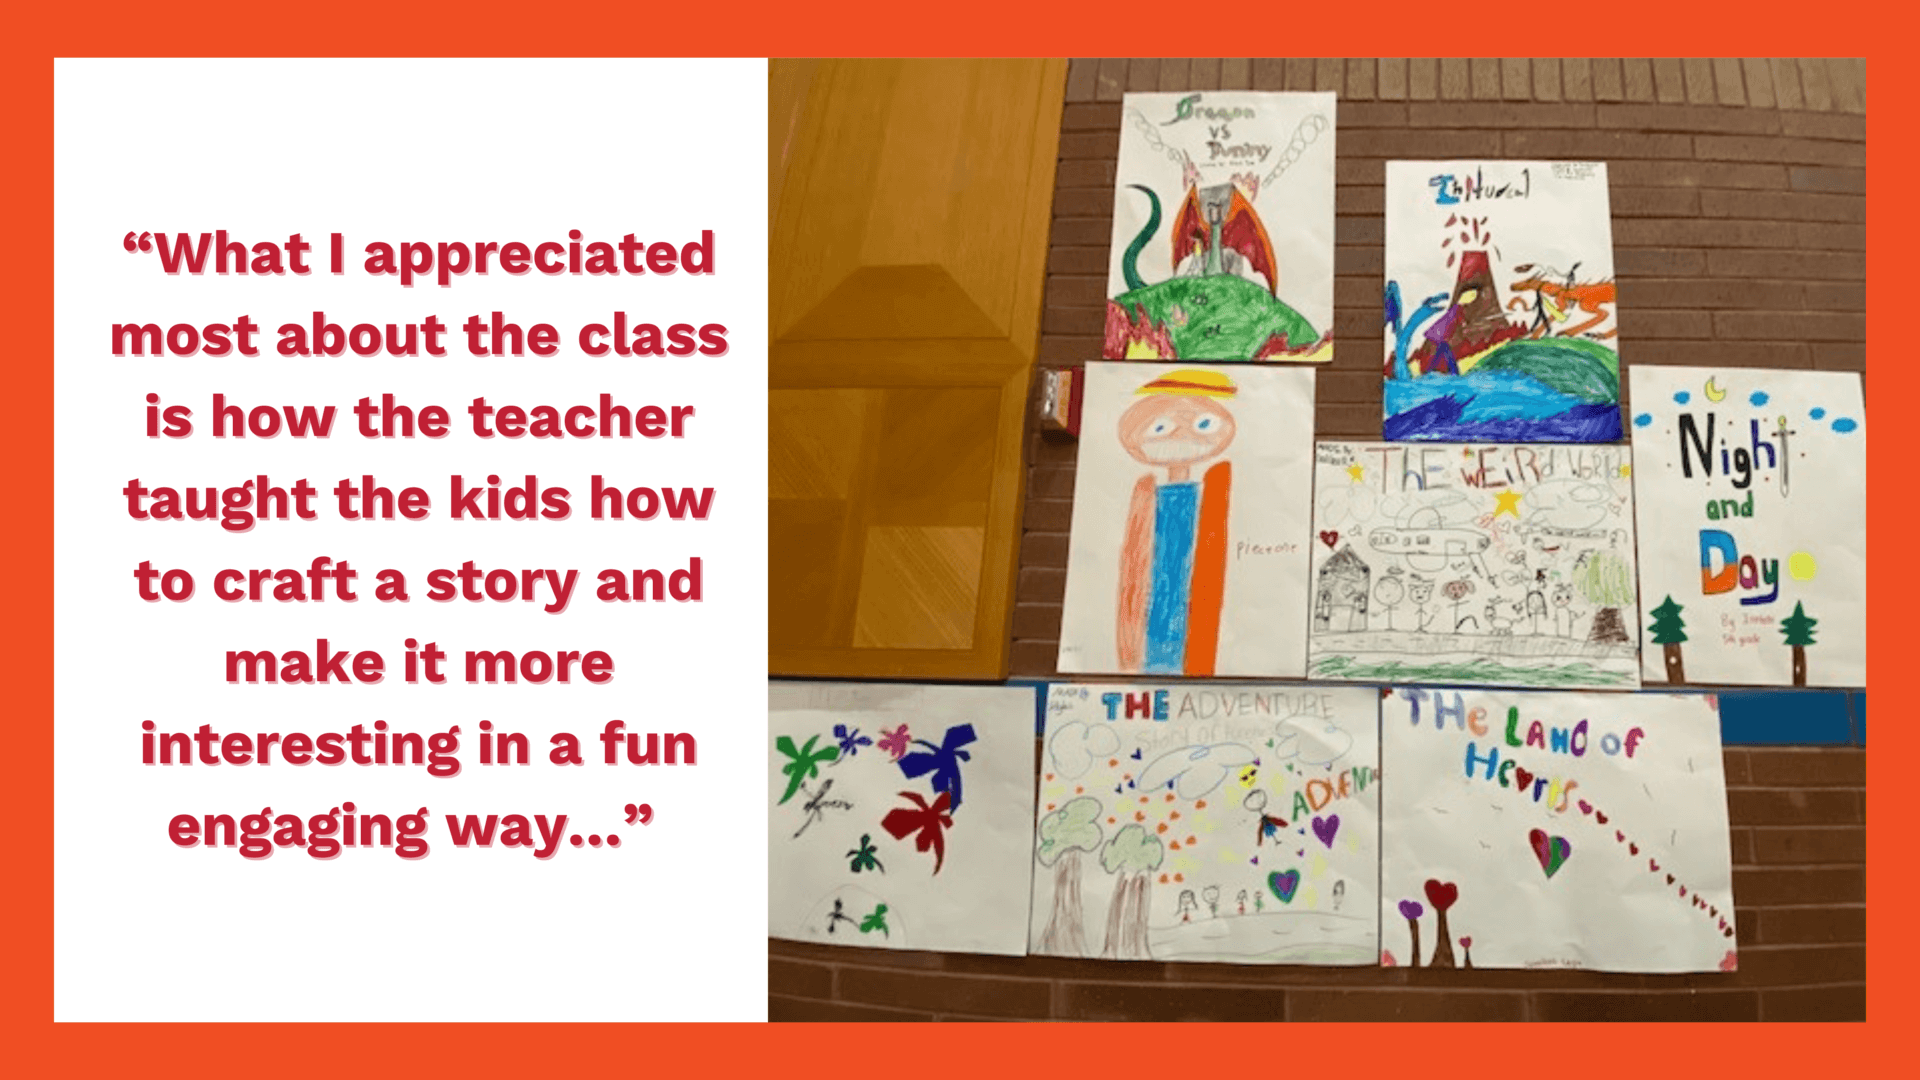 "What I appreciated most about the class is how the teacher taught the kids how to craft a story and make it more interesting in a fun engaging way..."